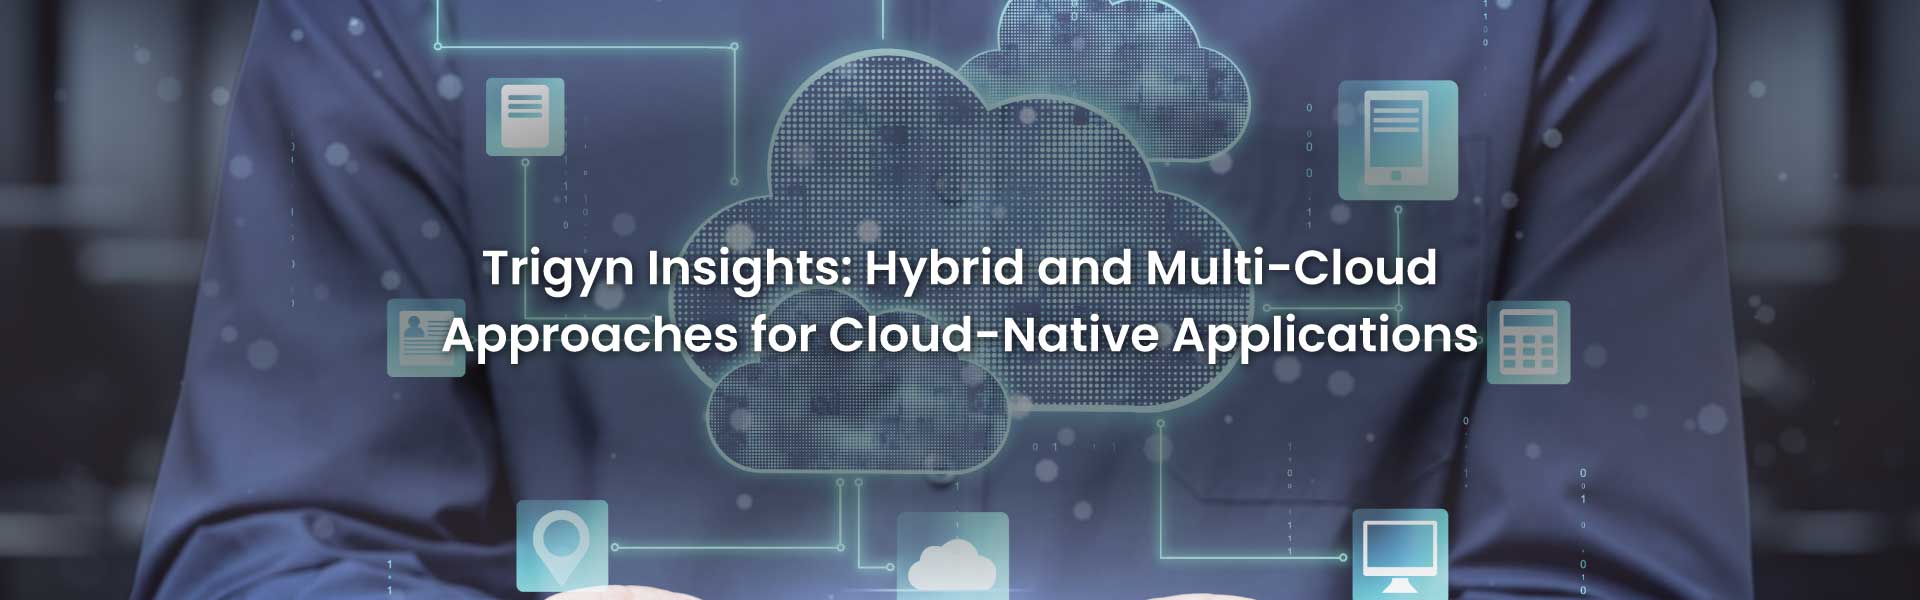 Hybrid and Multi-Cloud for cloud native applications